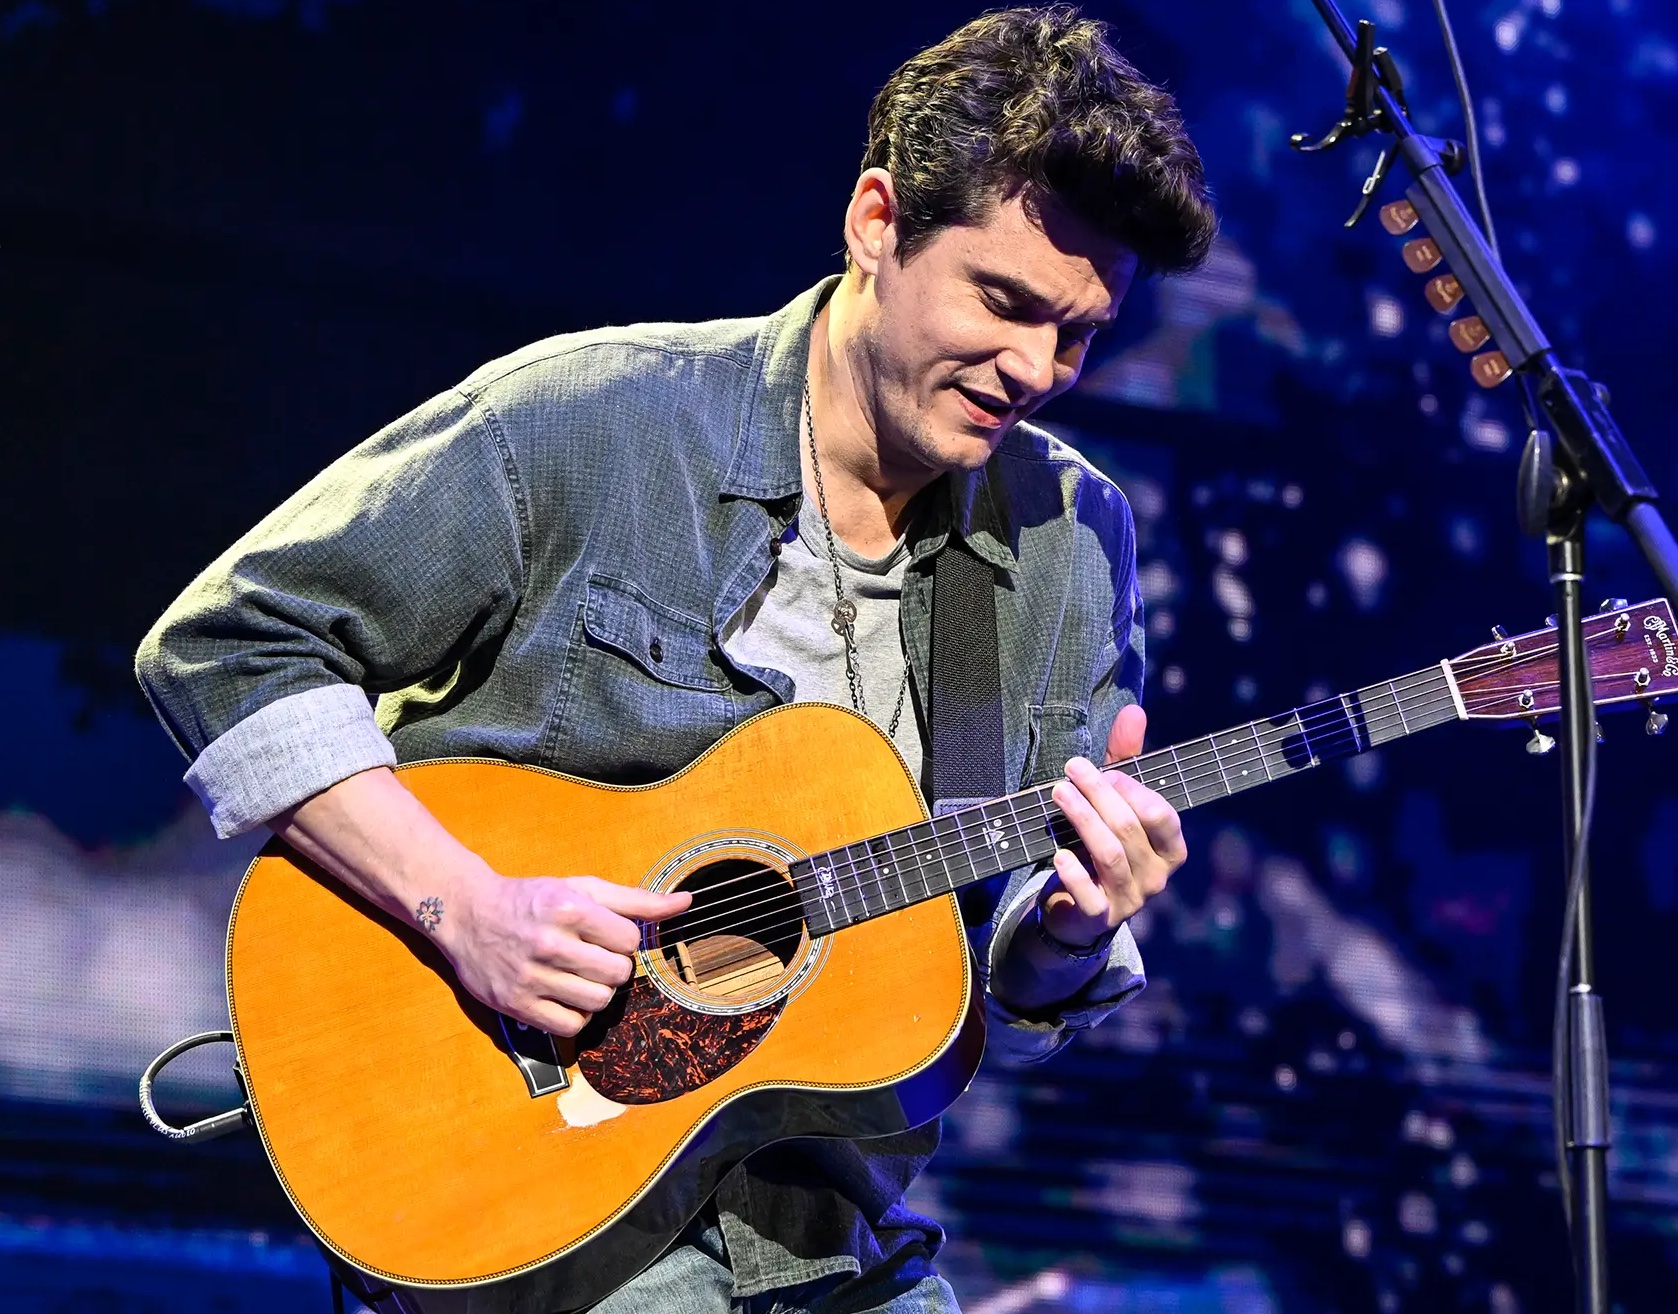 Celebs who slept with common people - john mayer playing guitar